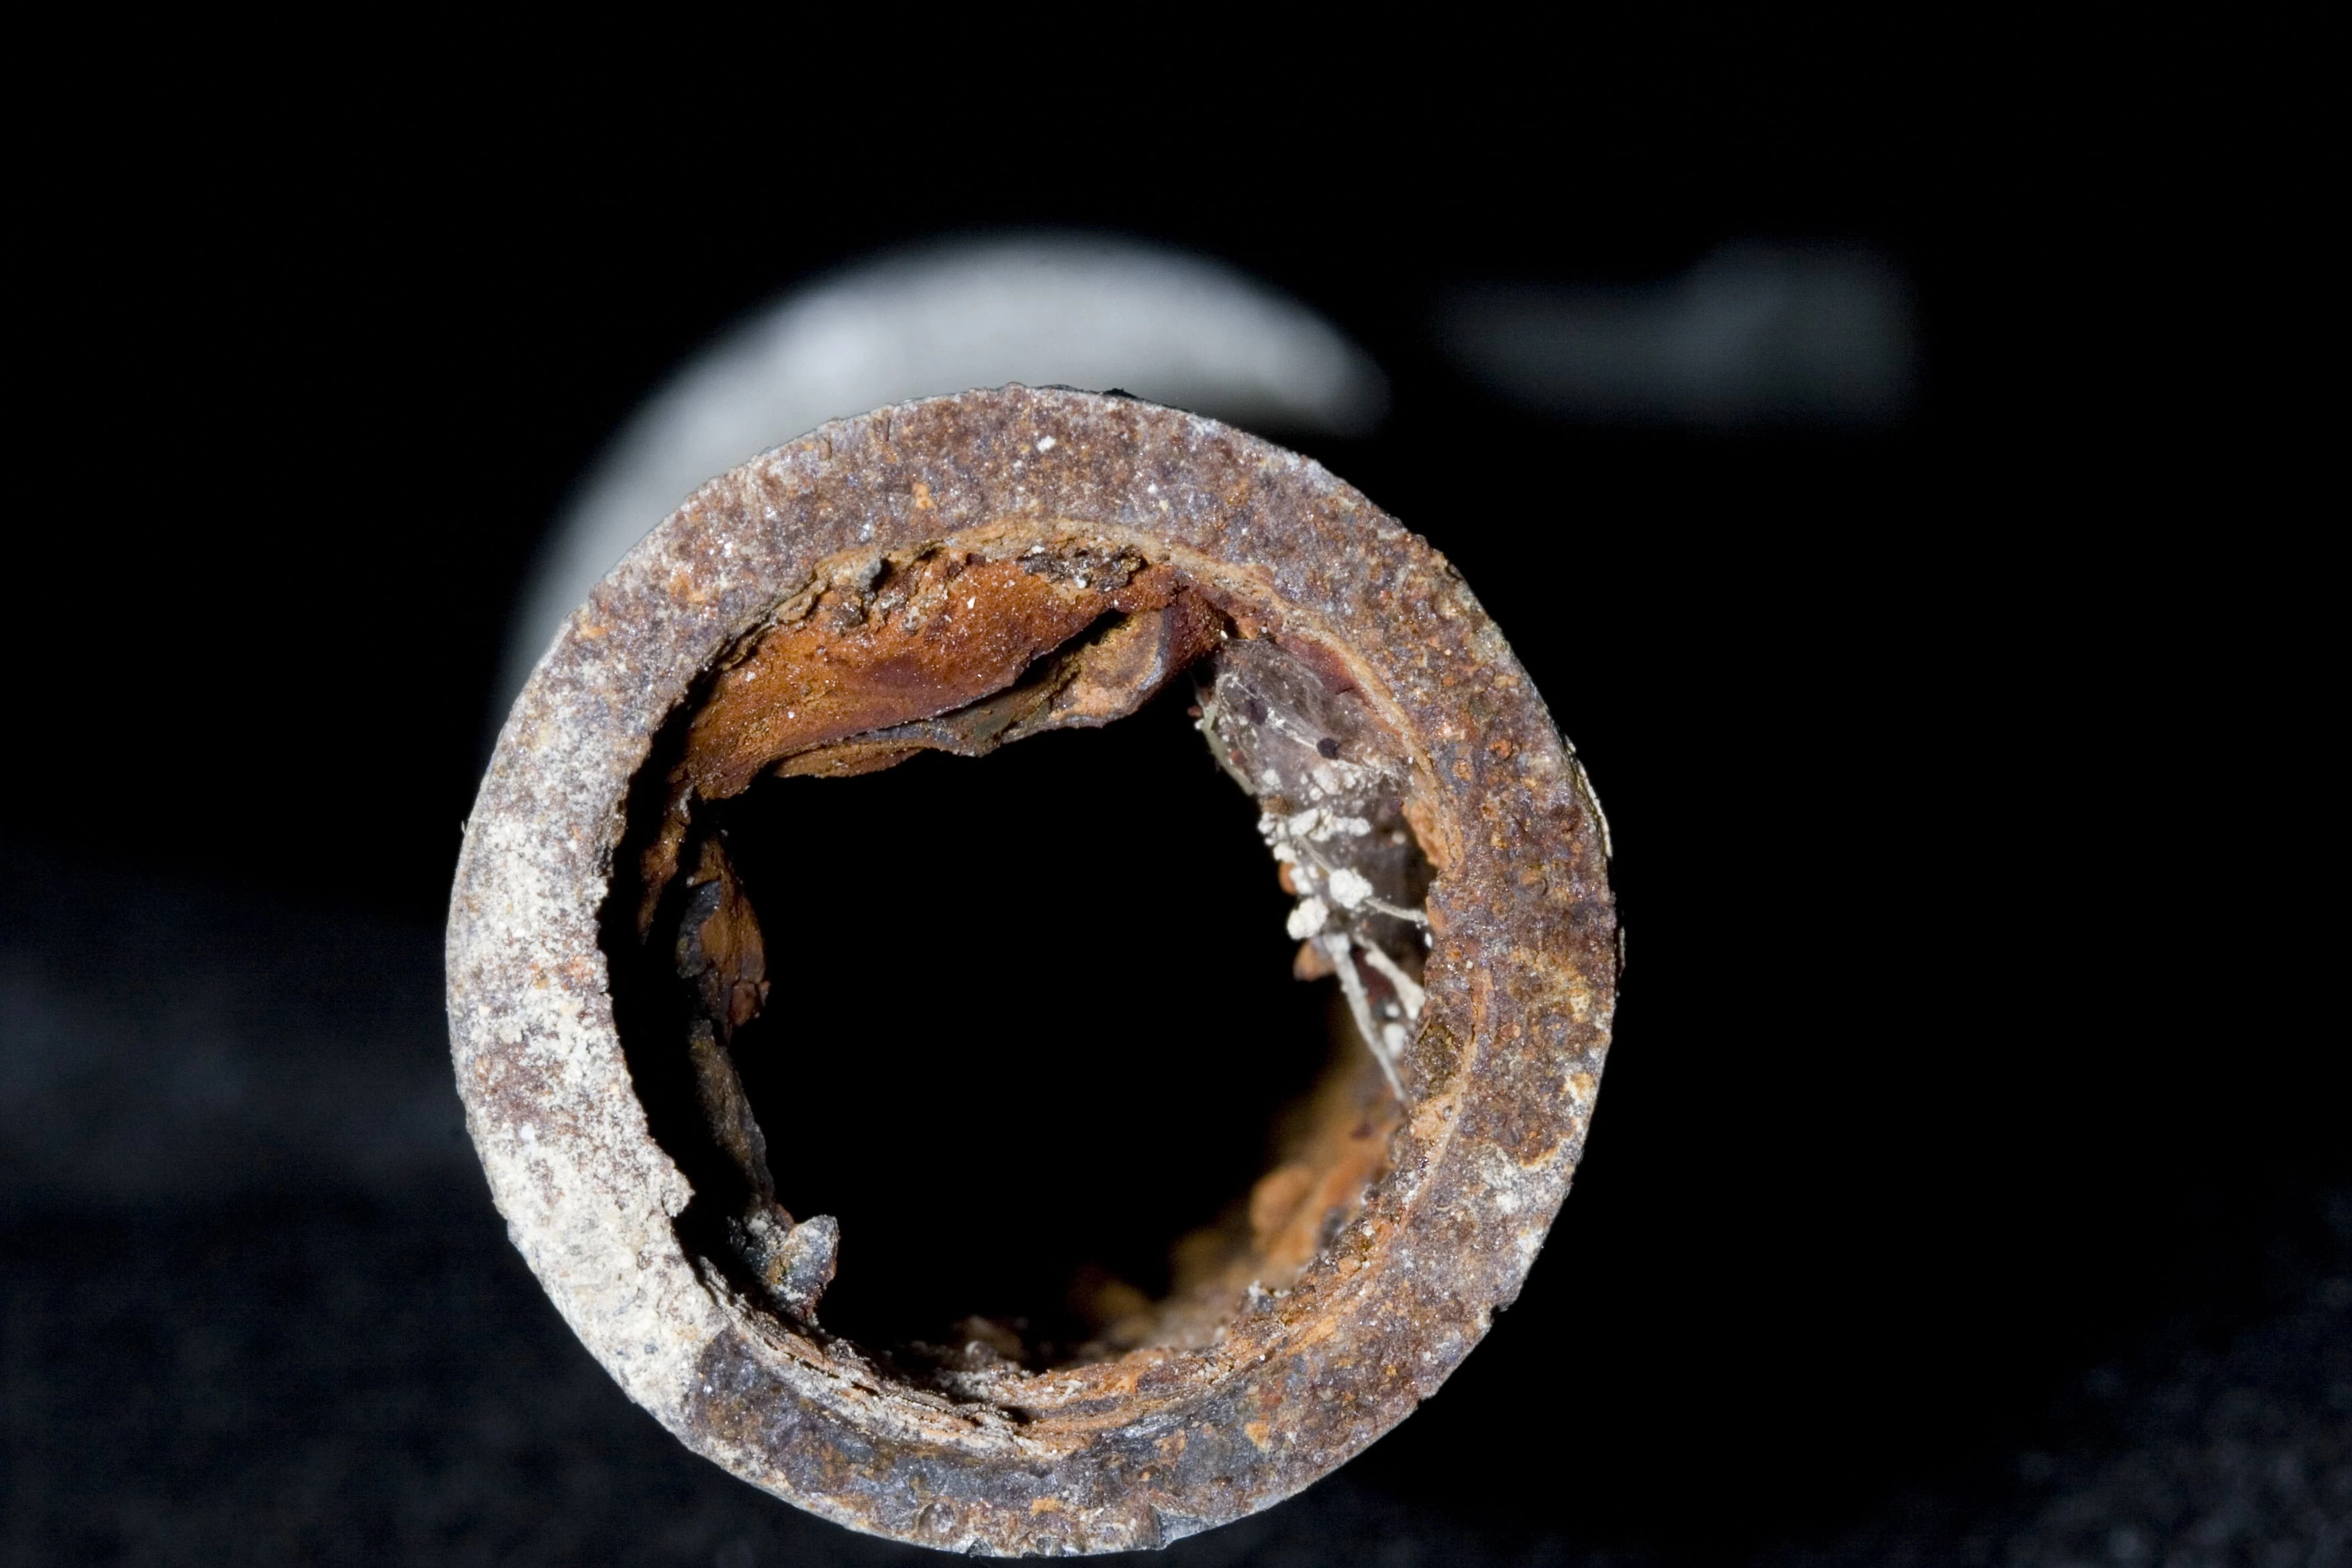 A cross section cut of a rusty galvanized pipe that leads to clogged drains in older homes